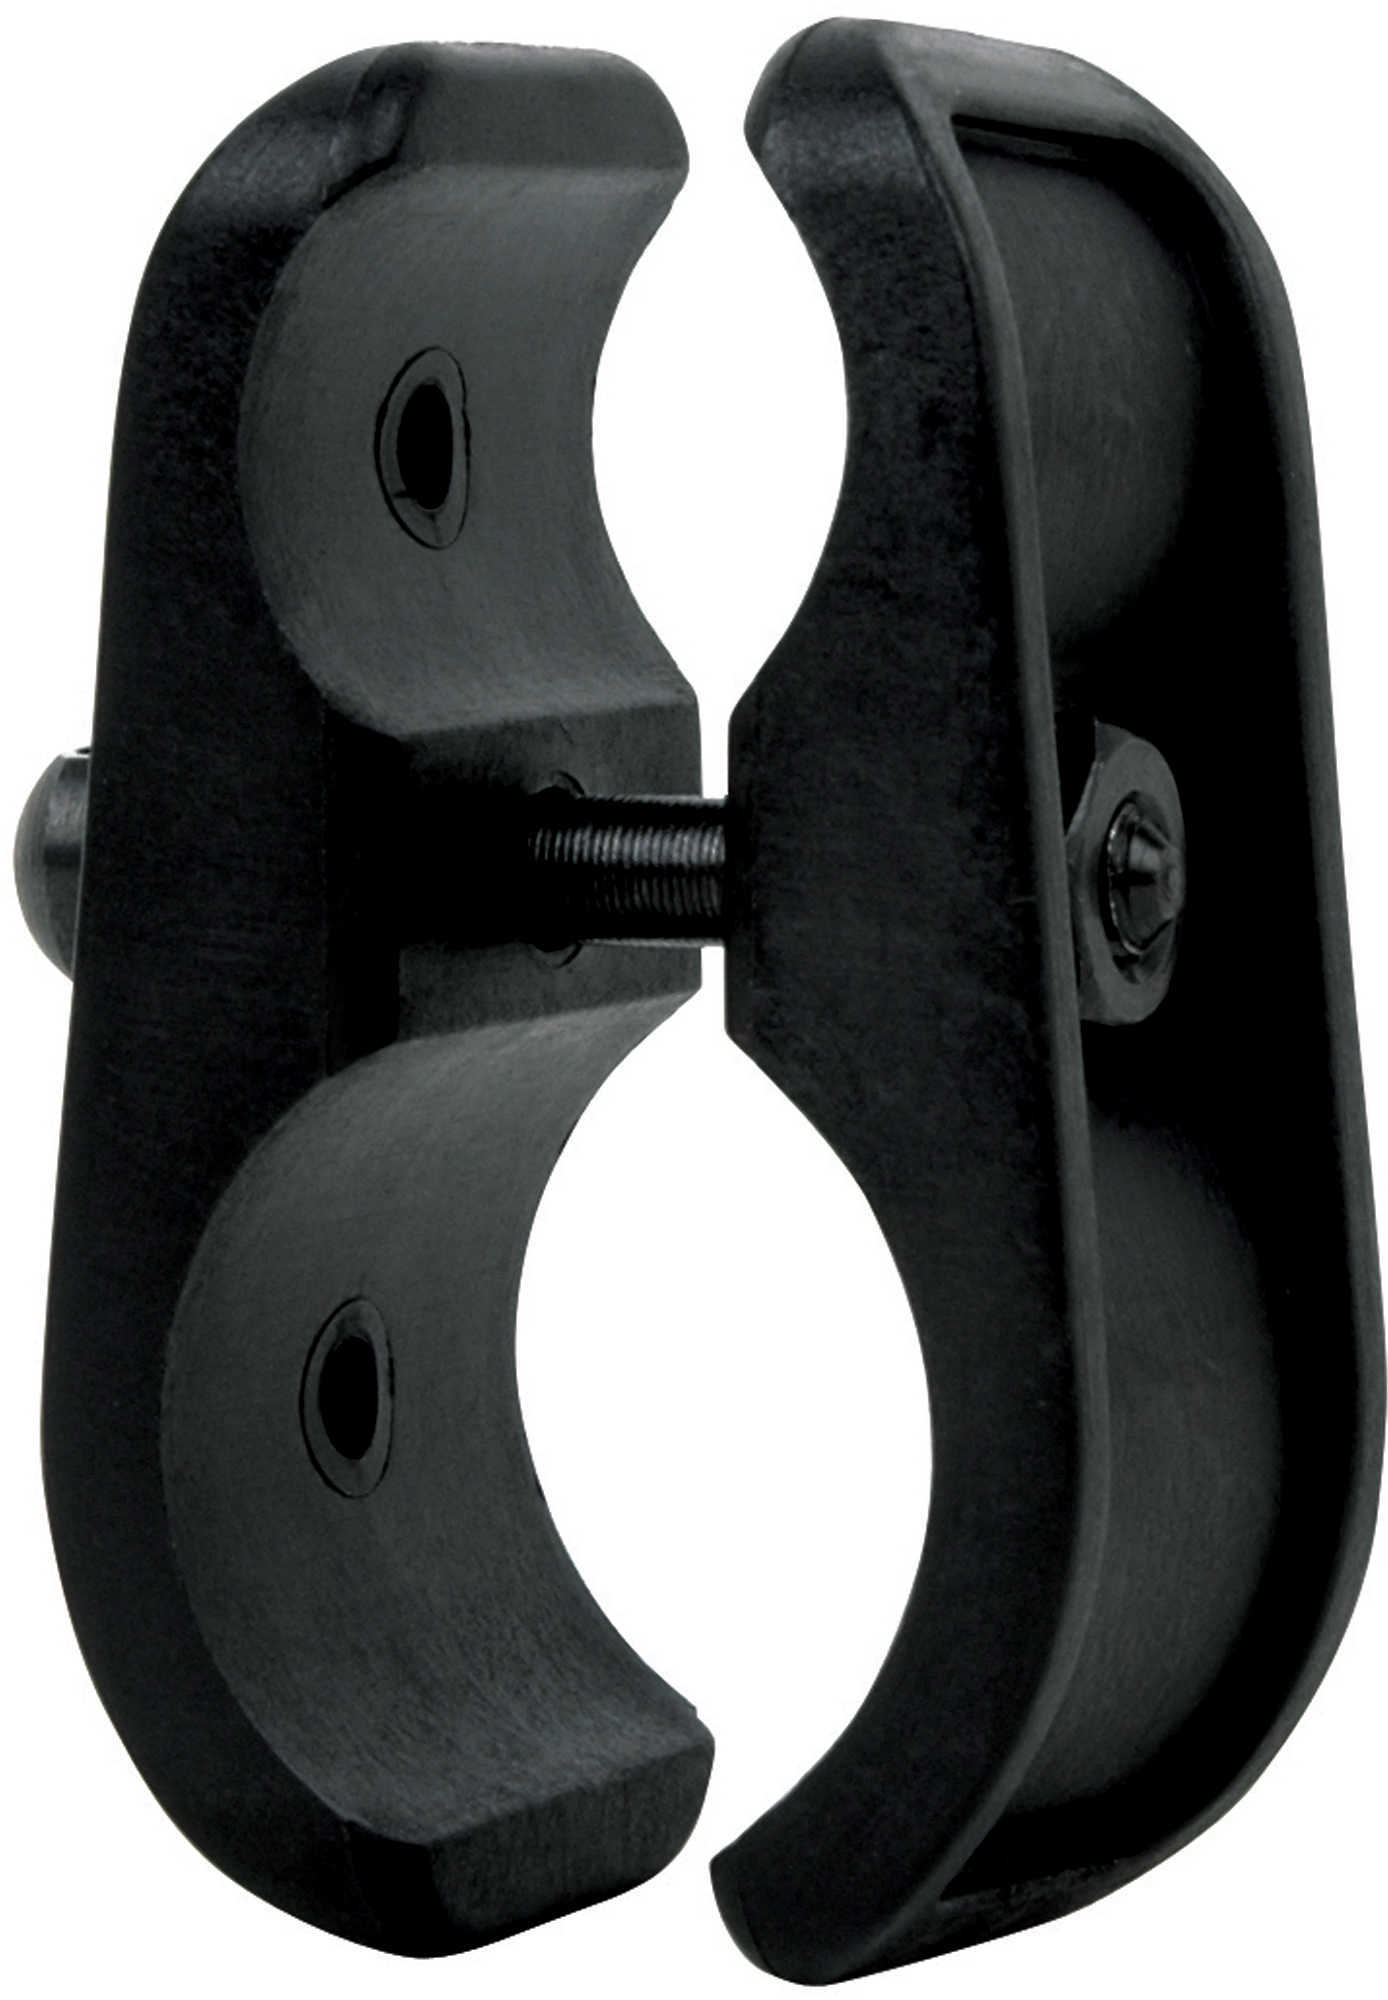 Advanced Technology Injection Molded Clamp With Sling Swivel Stud Md: SMC1100